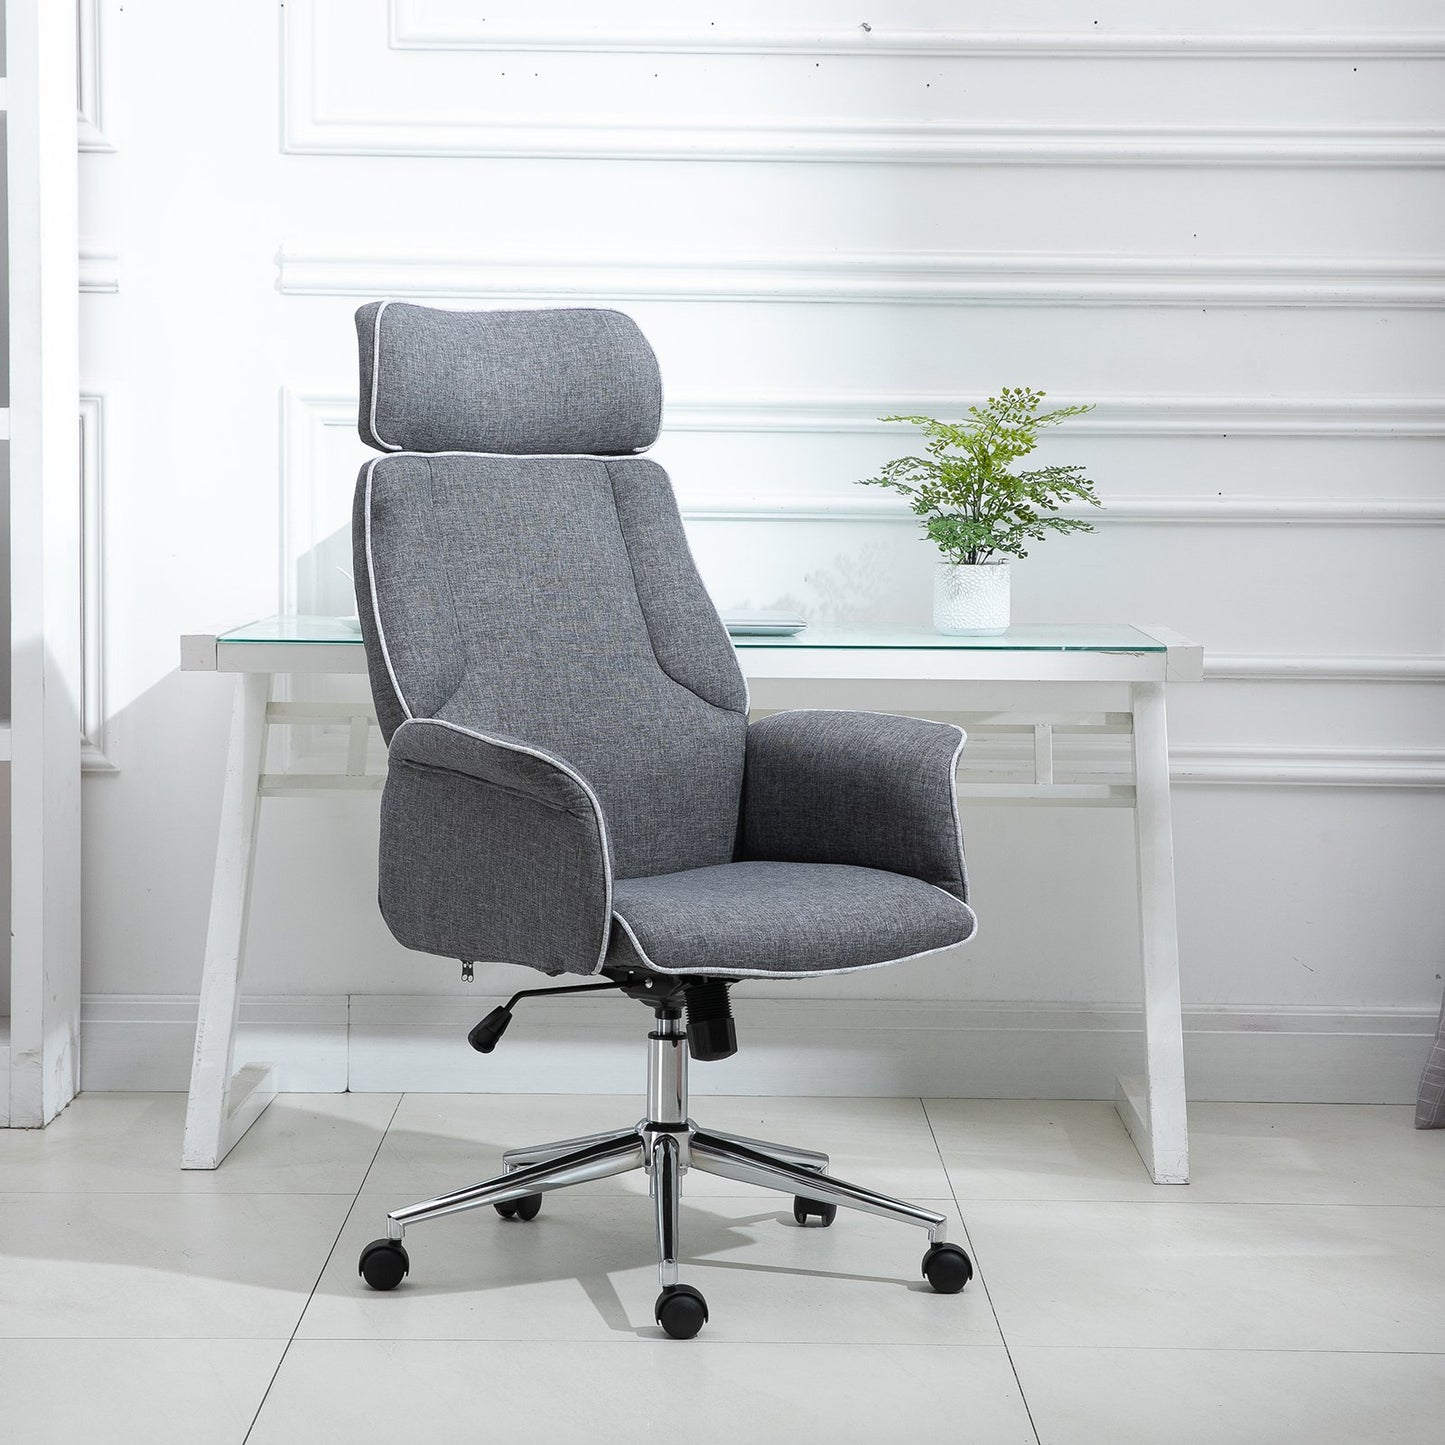 Vinsetto Desk Rocking Chair for Office Executive Adjustable High Back on Wheels Grey